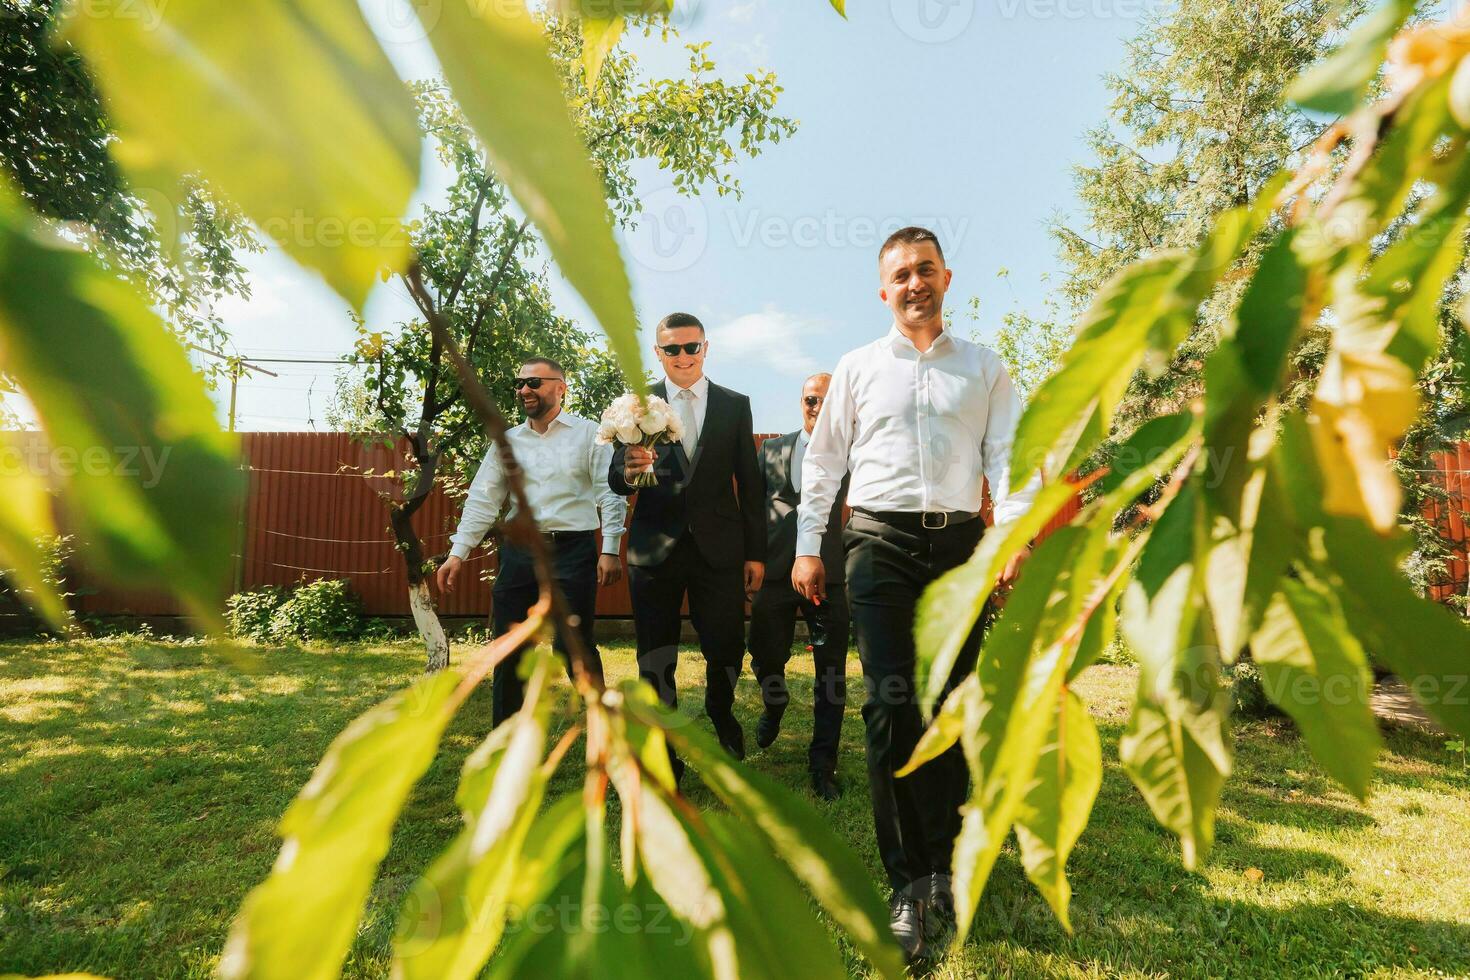 The groom in a black suit and glasses and his stylish friends wearing white shirts and black pants and glasses are standing in the backyard in the garden. The groom is holding a bouquet. photo